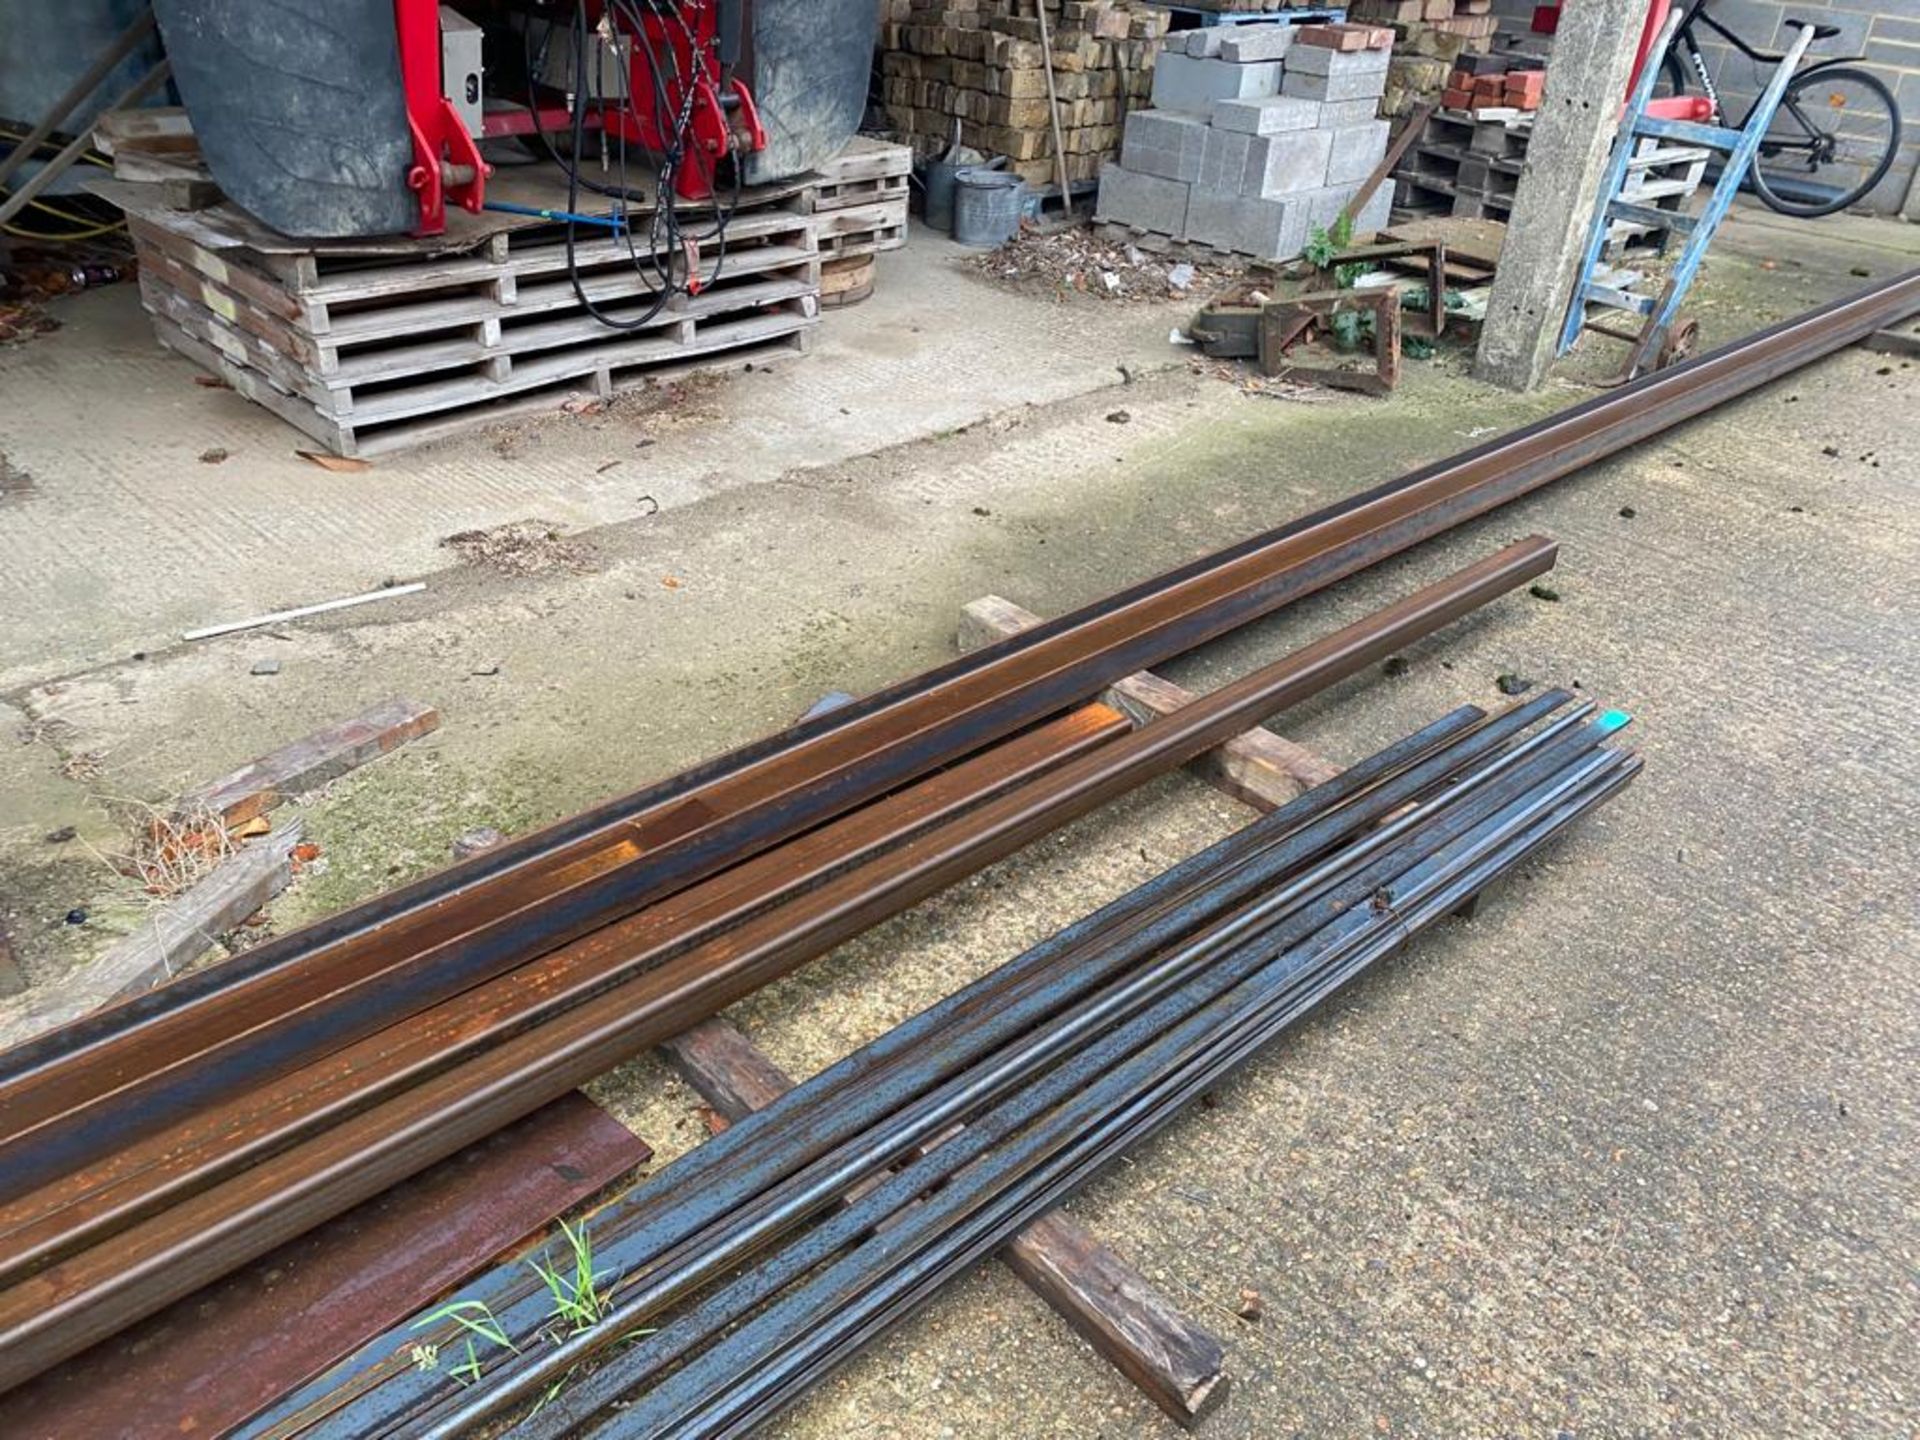 1 x Assorted Collection of Iron Strips, Rods, Plate and RSJ's - One RSJ Measures Over 12 Meters in - Image 2 of 4